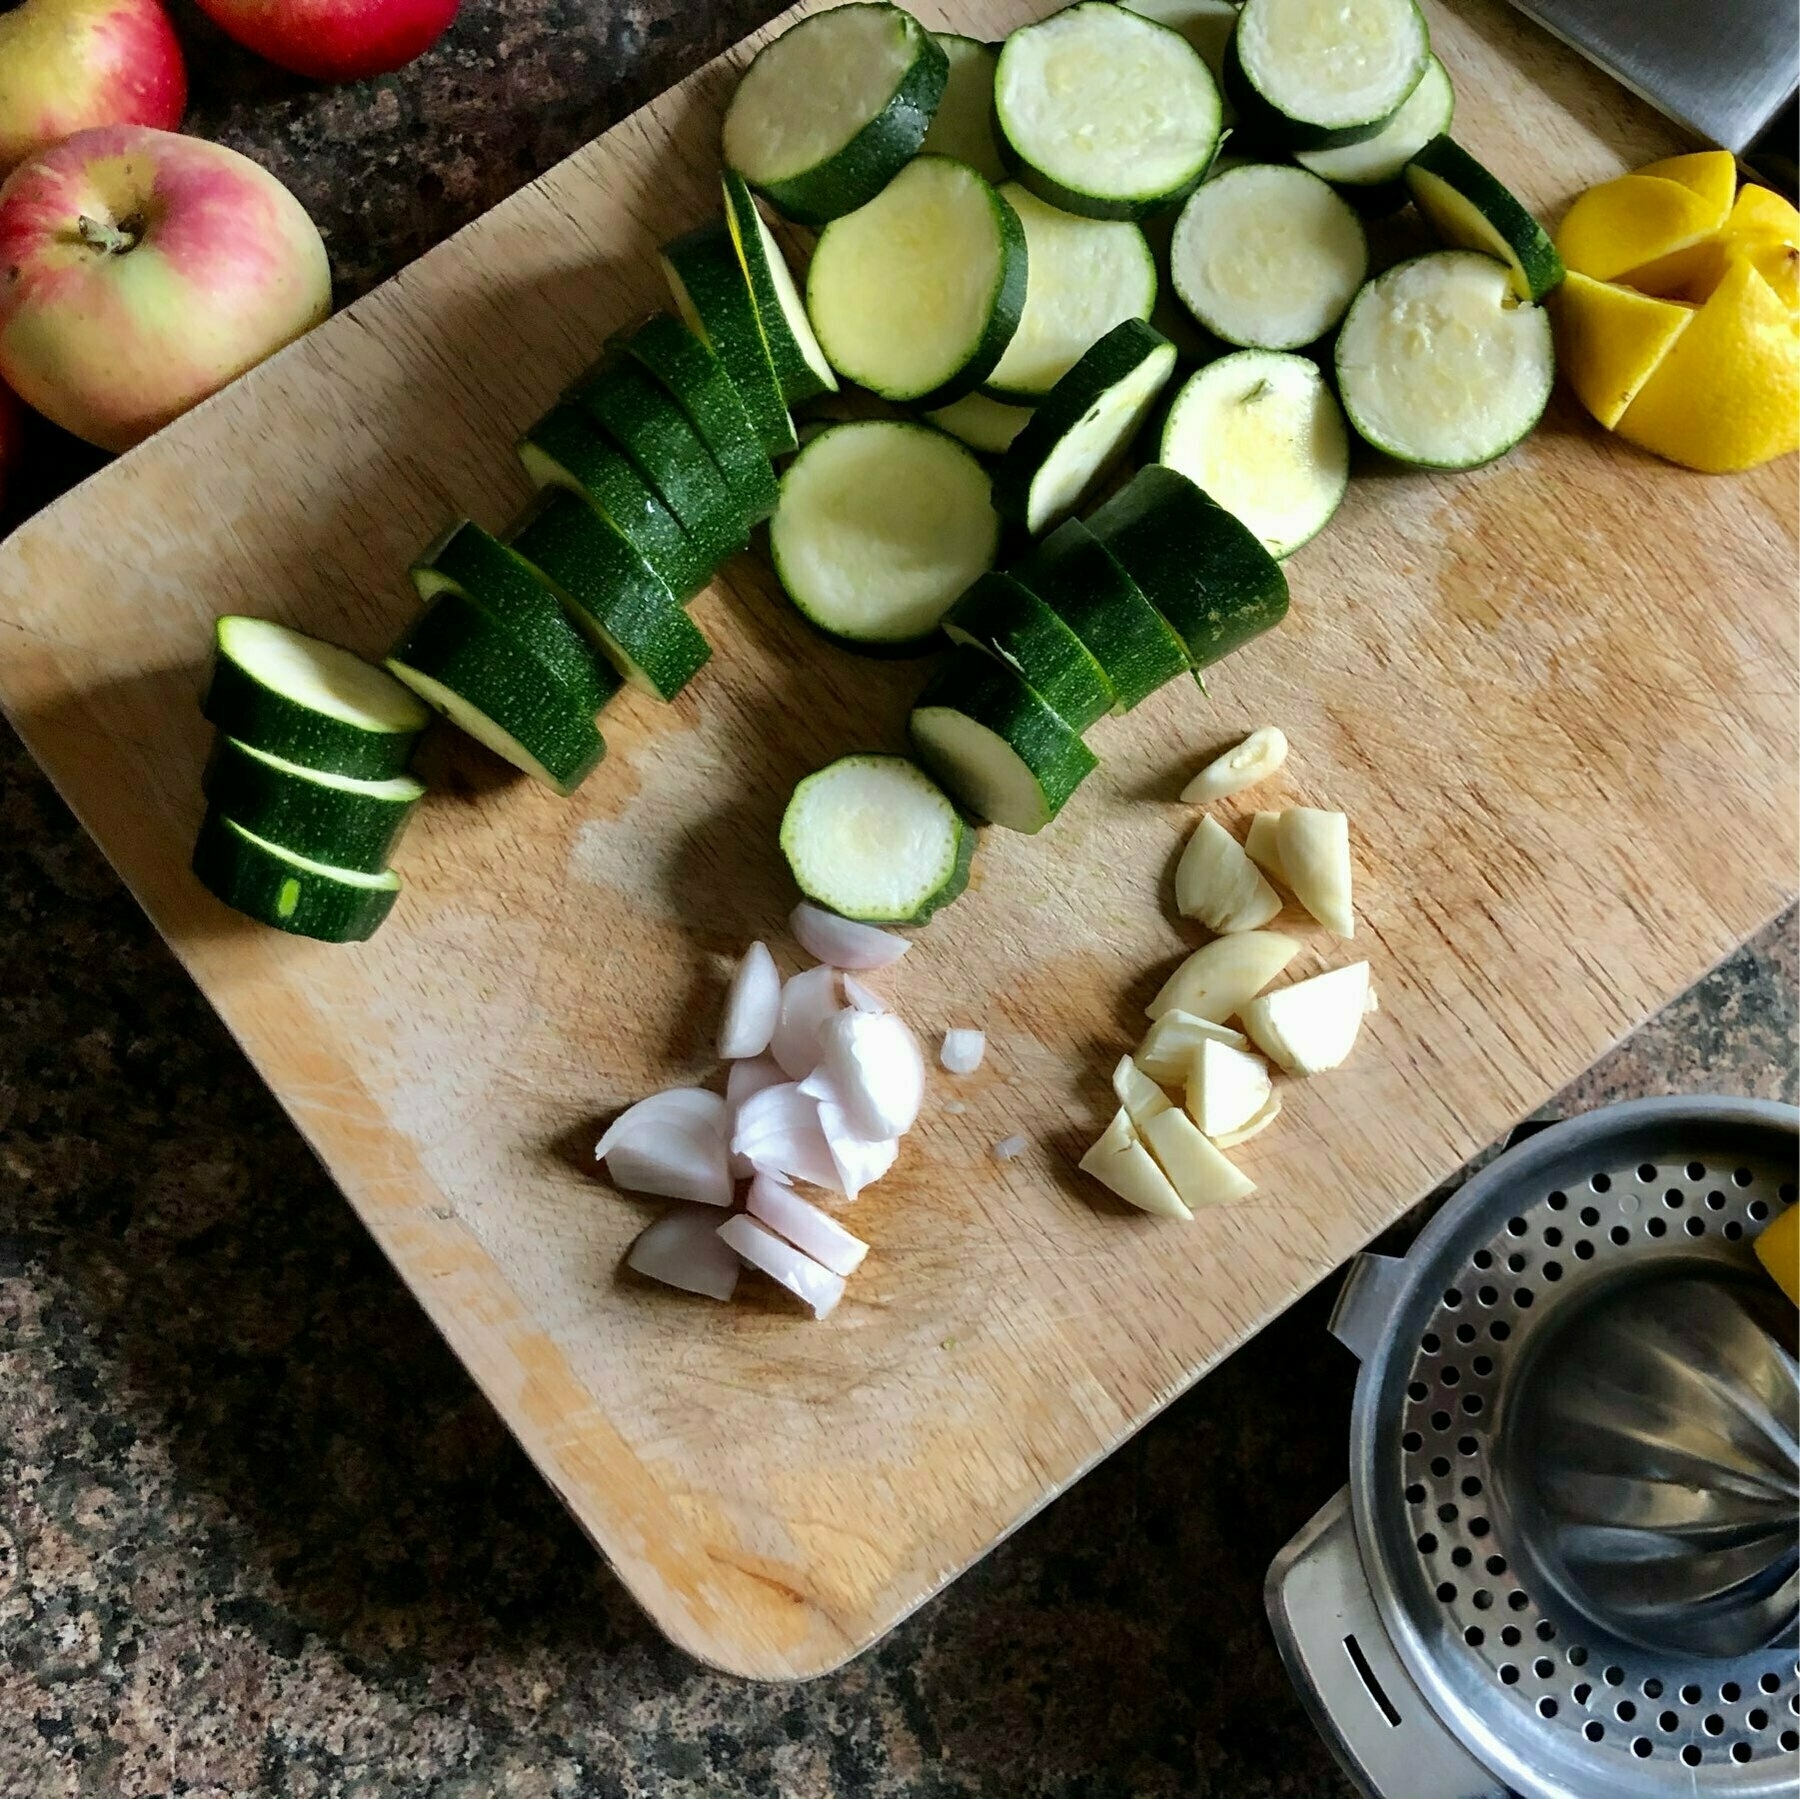 Chopping courgettes and shallots. 